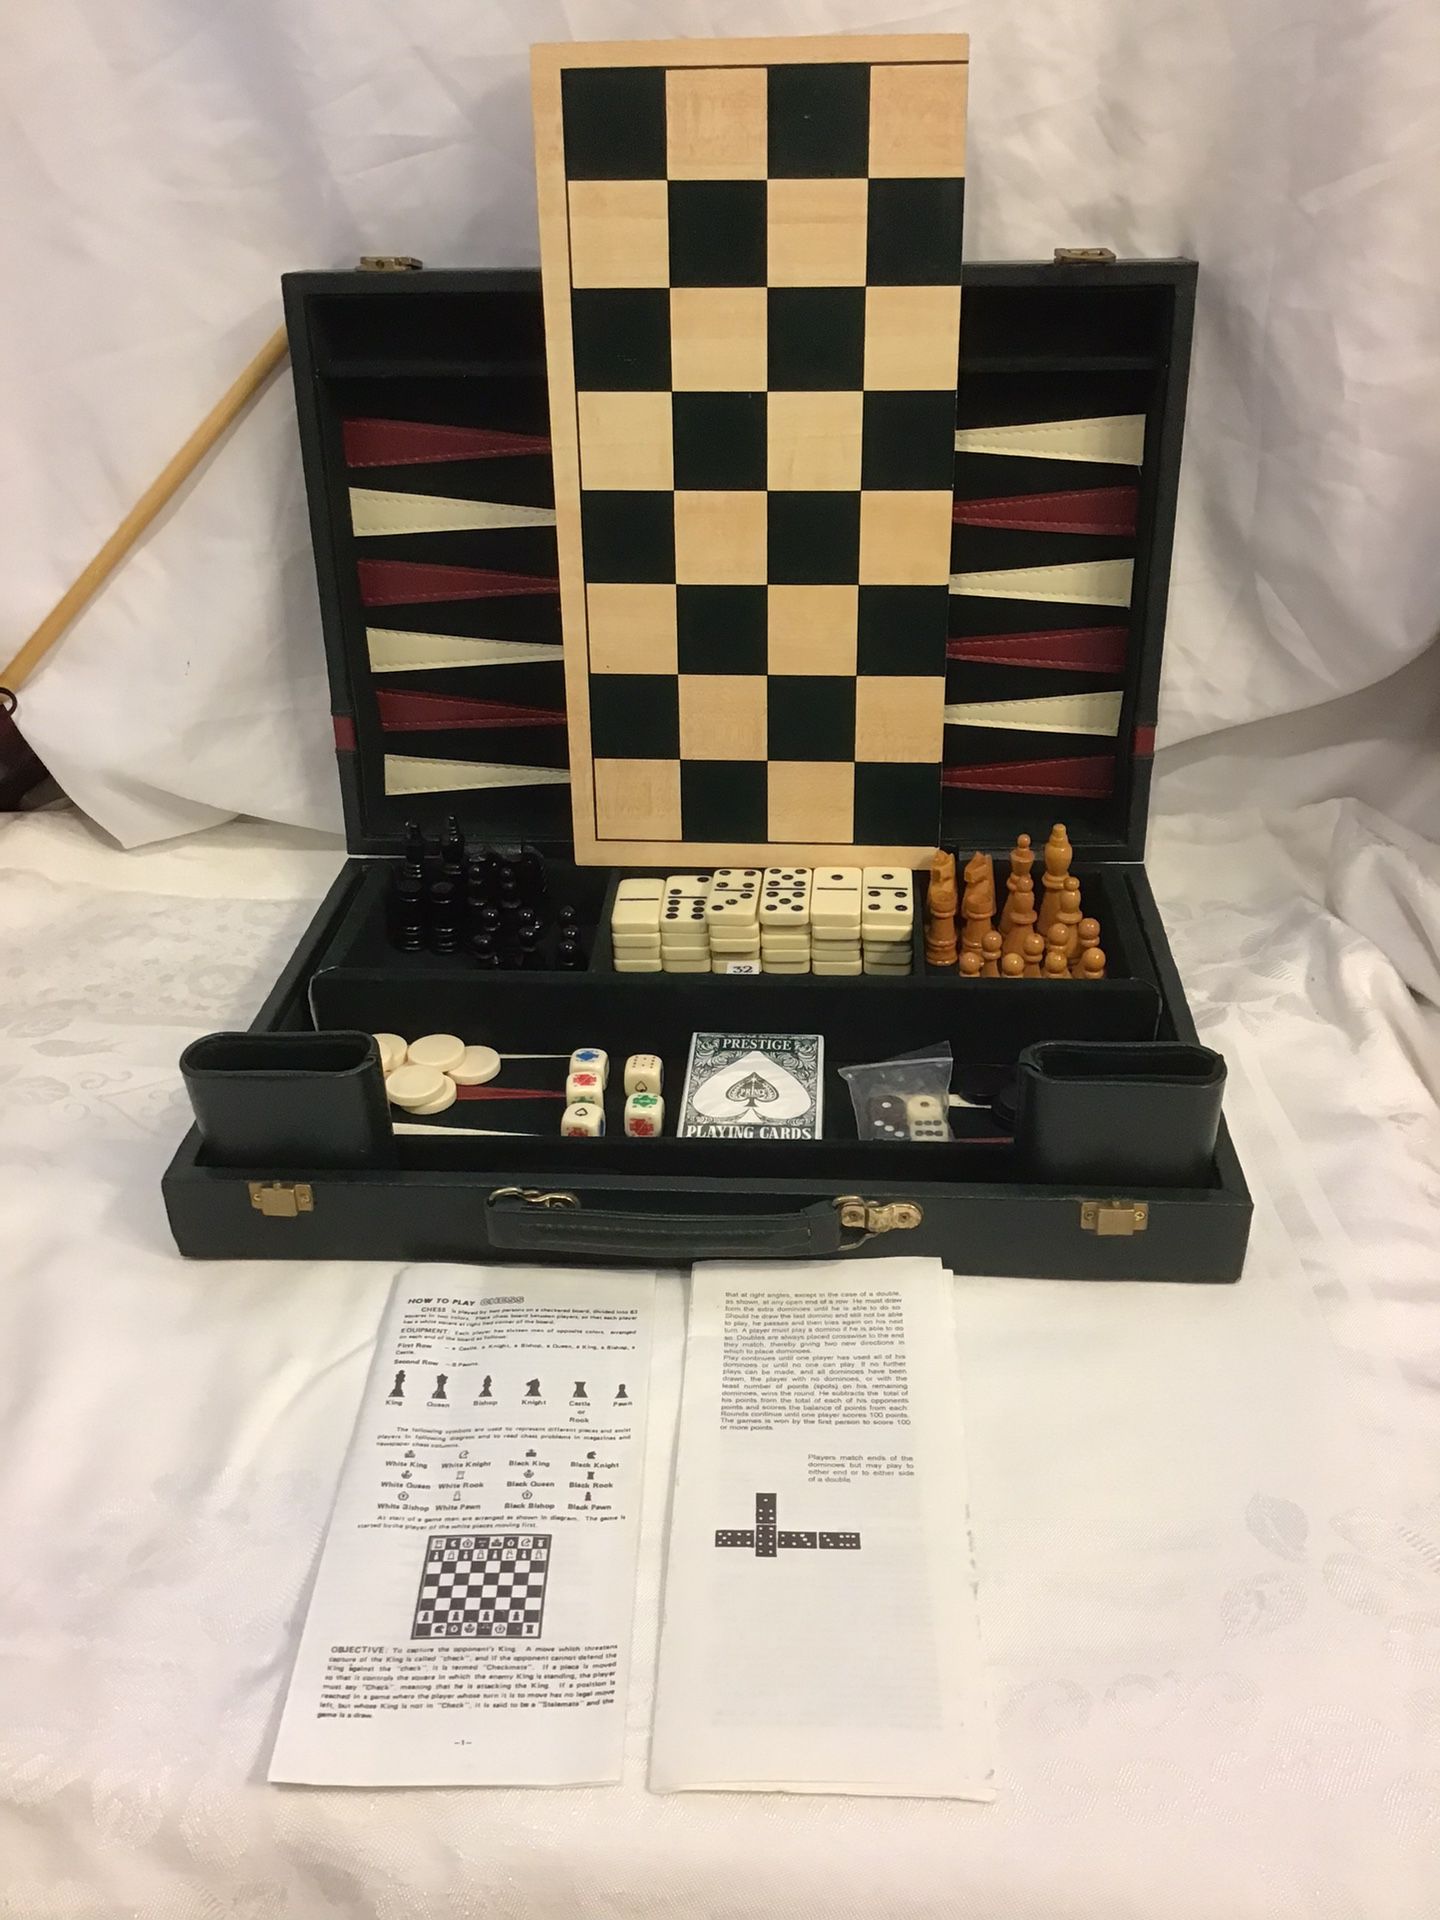 Vintage Travel Game, Faux Leather,Checkers Backgammon Wood Chess, Dominos Poker 